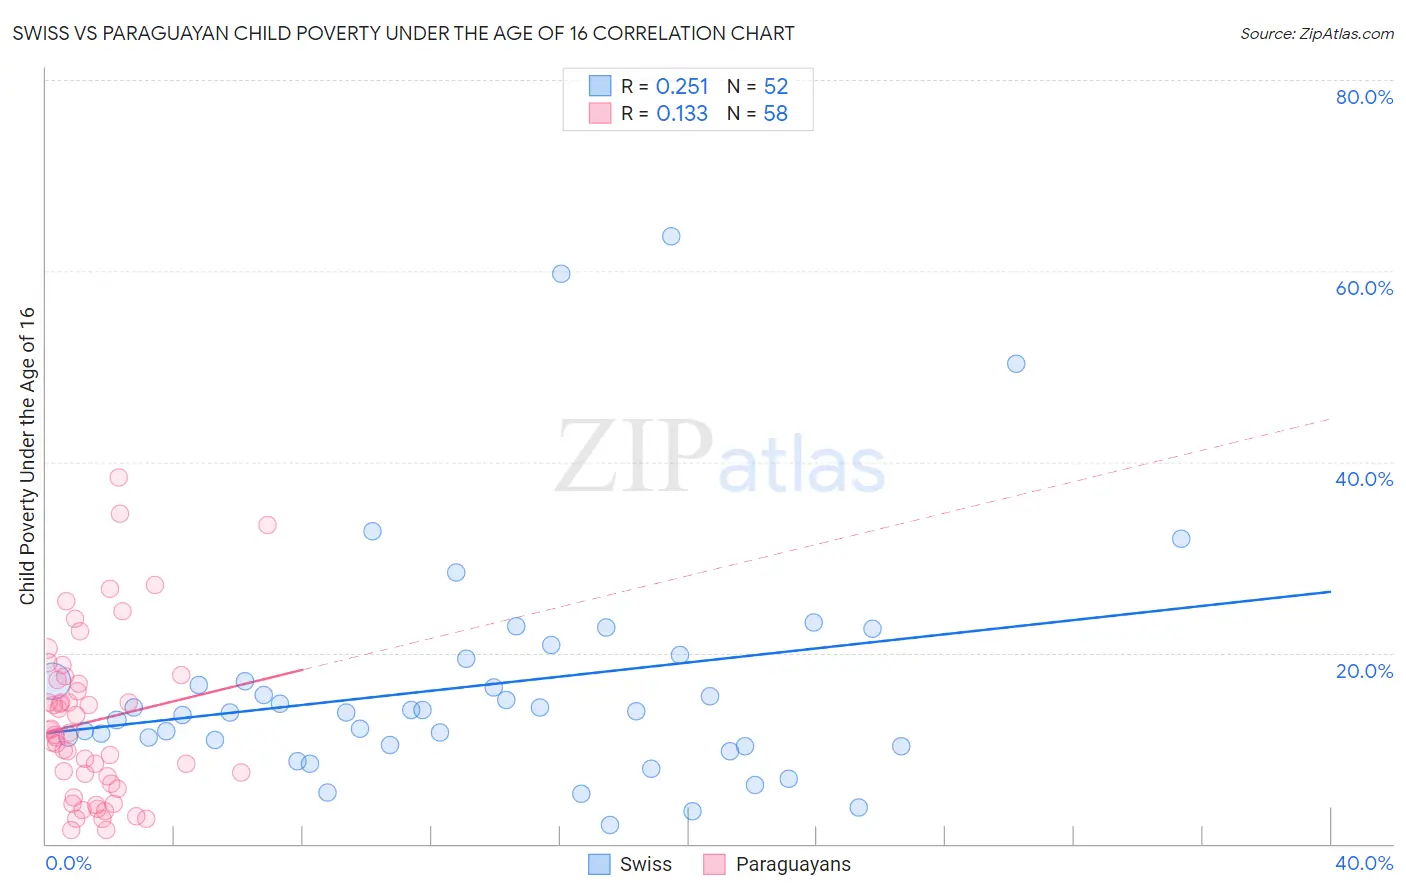 Swiss vs Paraguayan Child Poverty Under the Age of 16